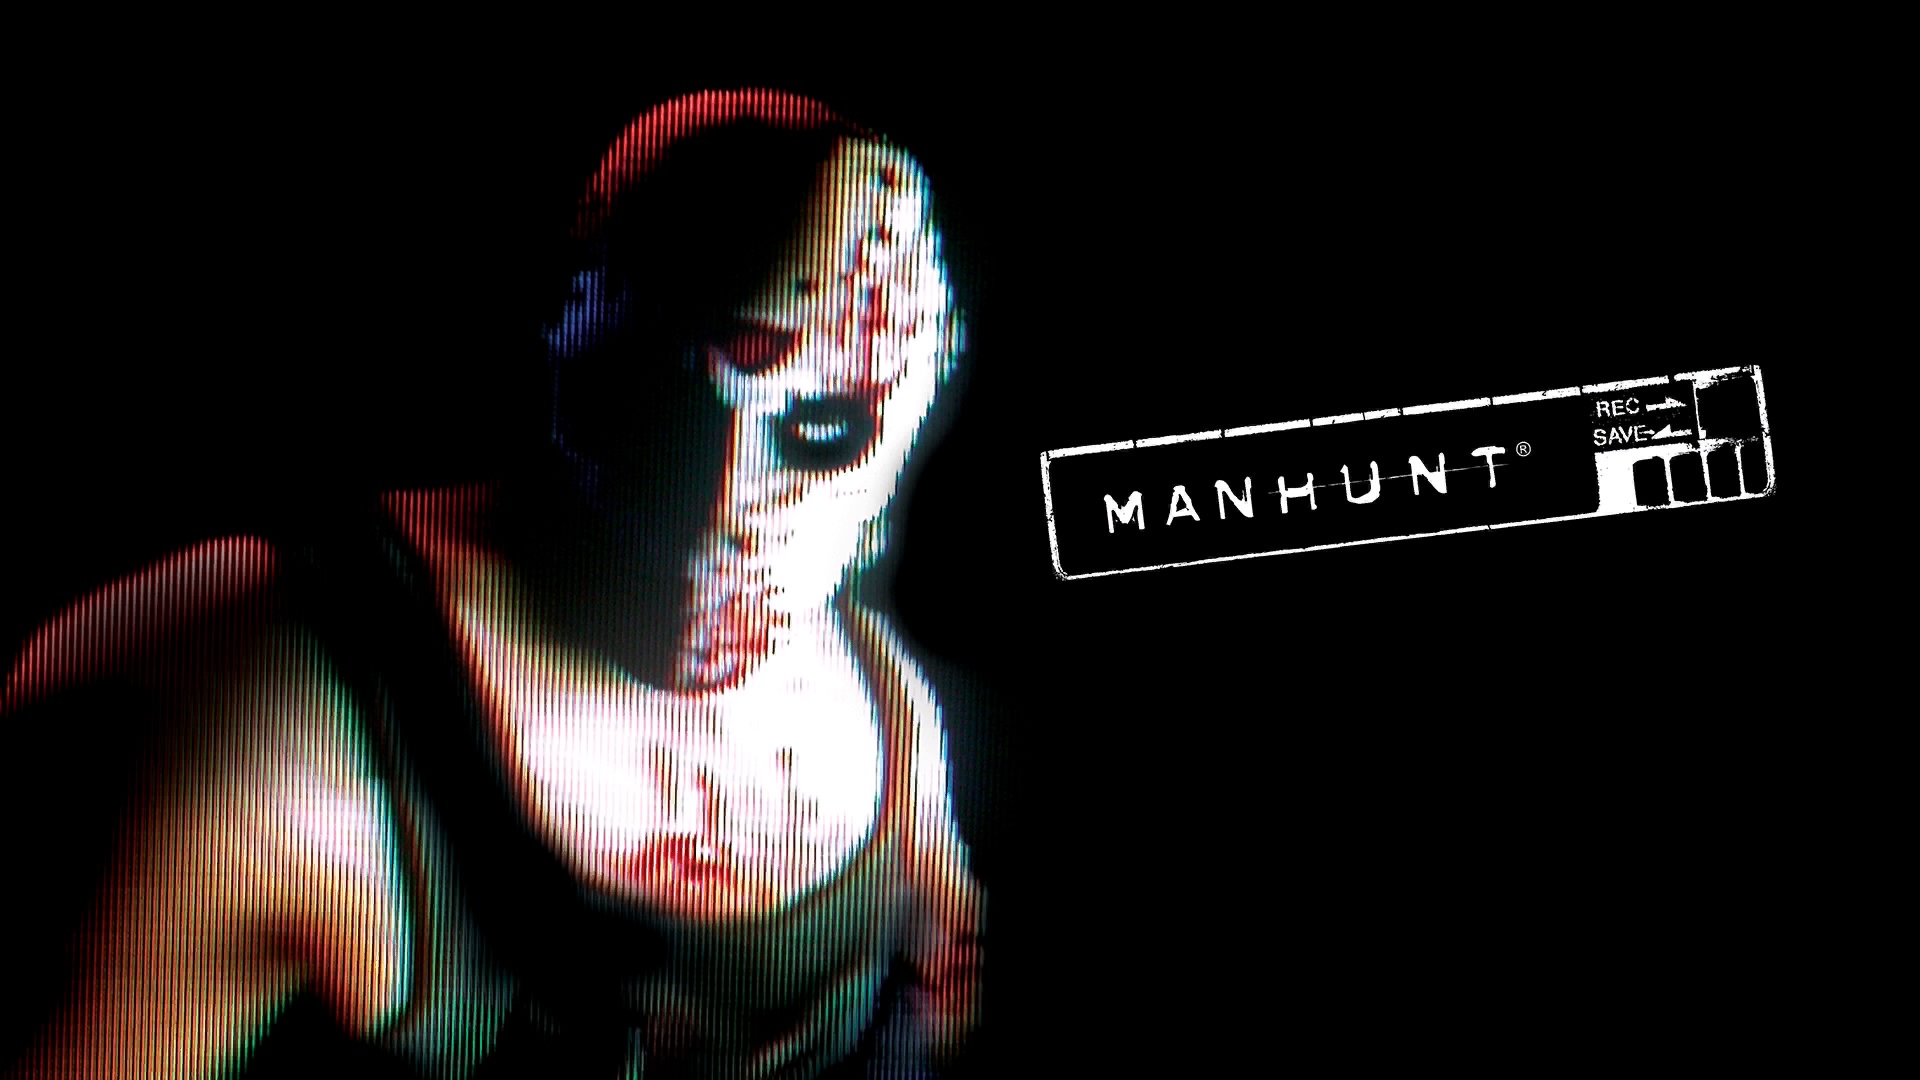 twisted and disgusting video games -  Manhunt 1 & 2